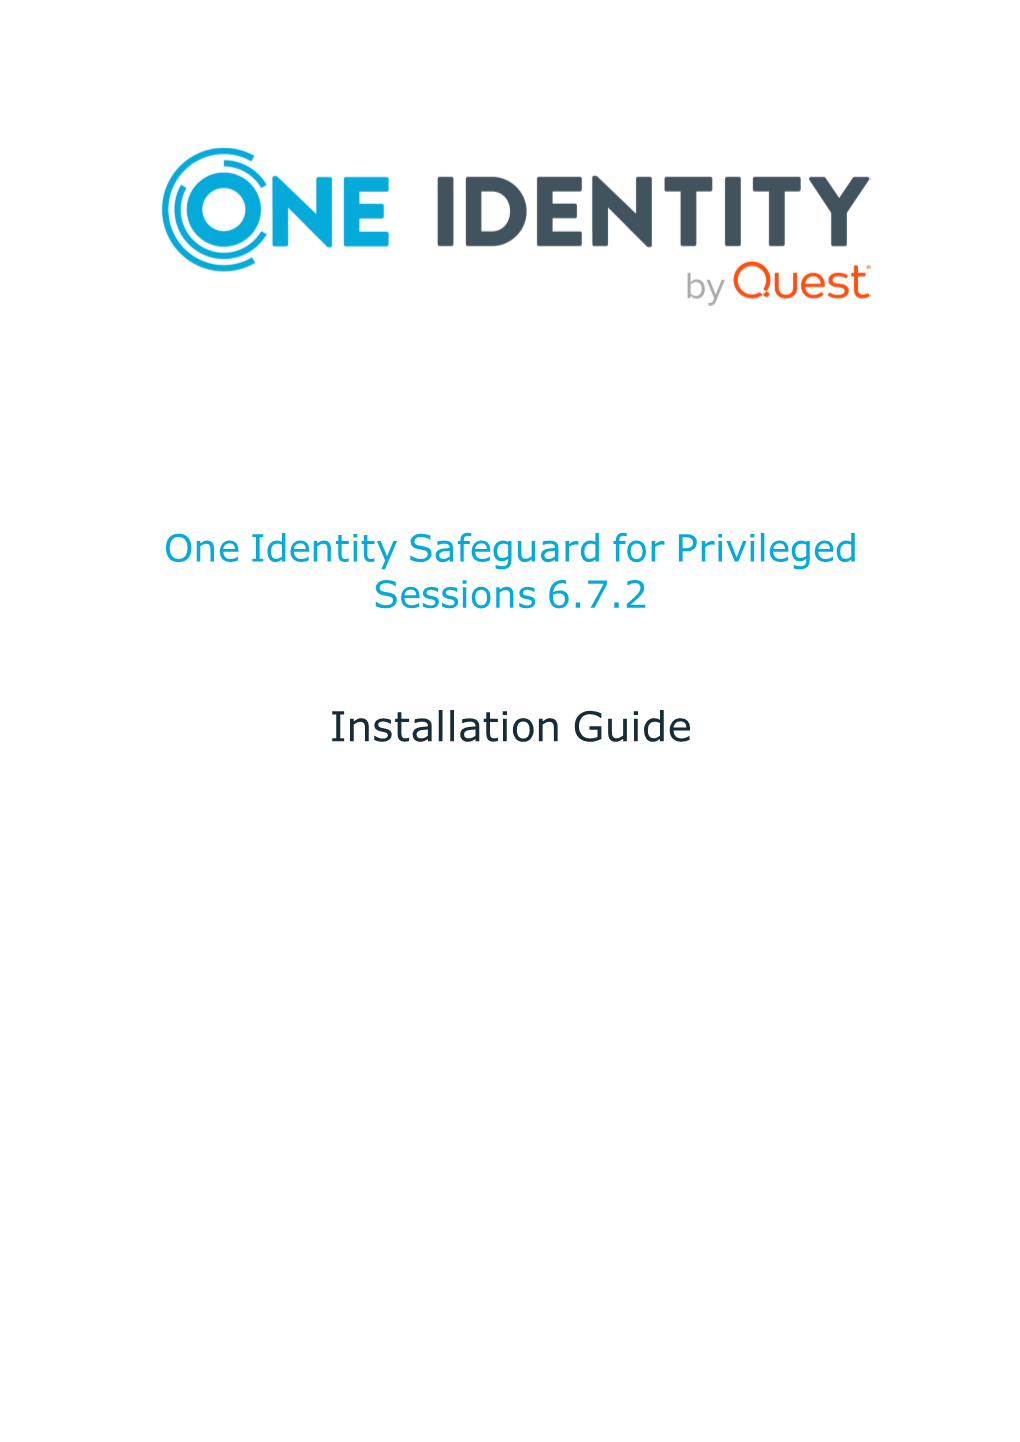 Download the Relevant Firmware from the One Identity Knowledge Base